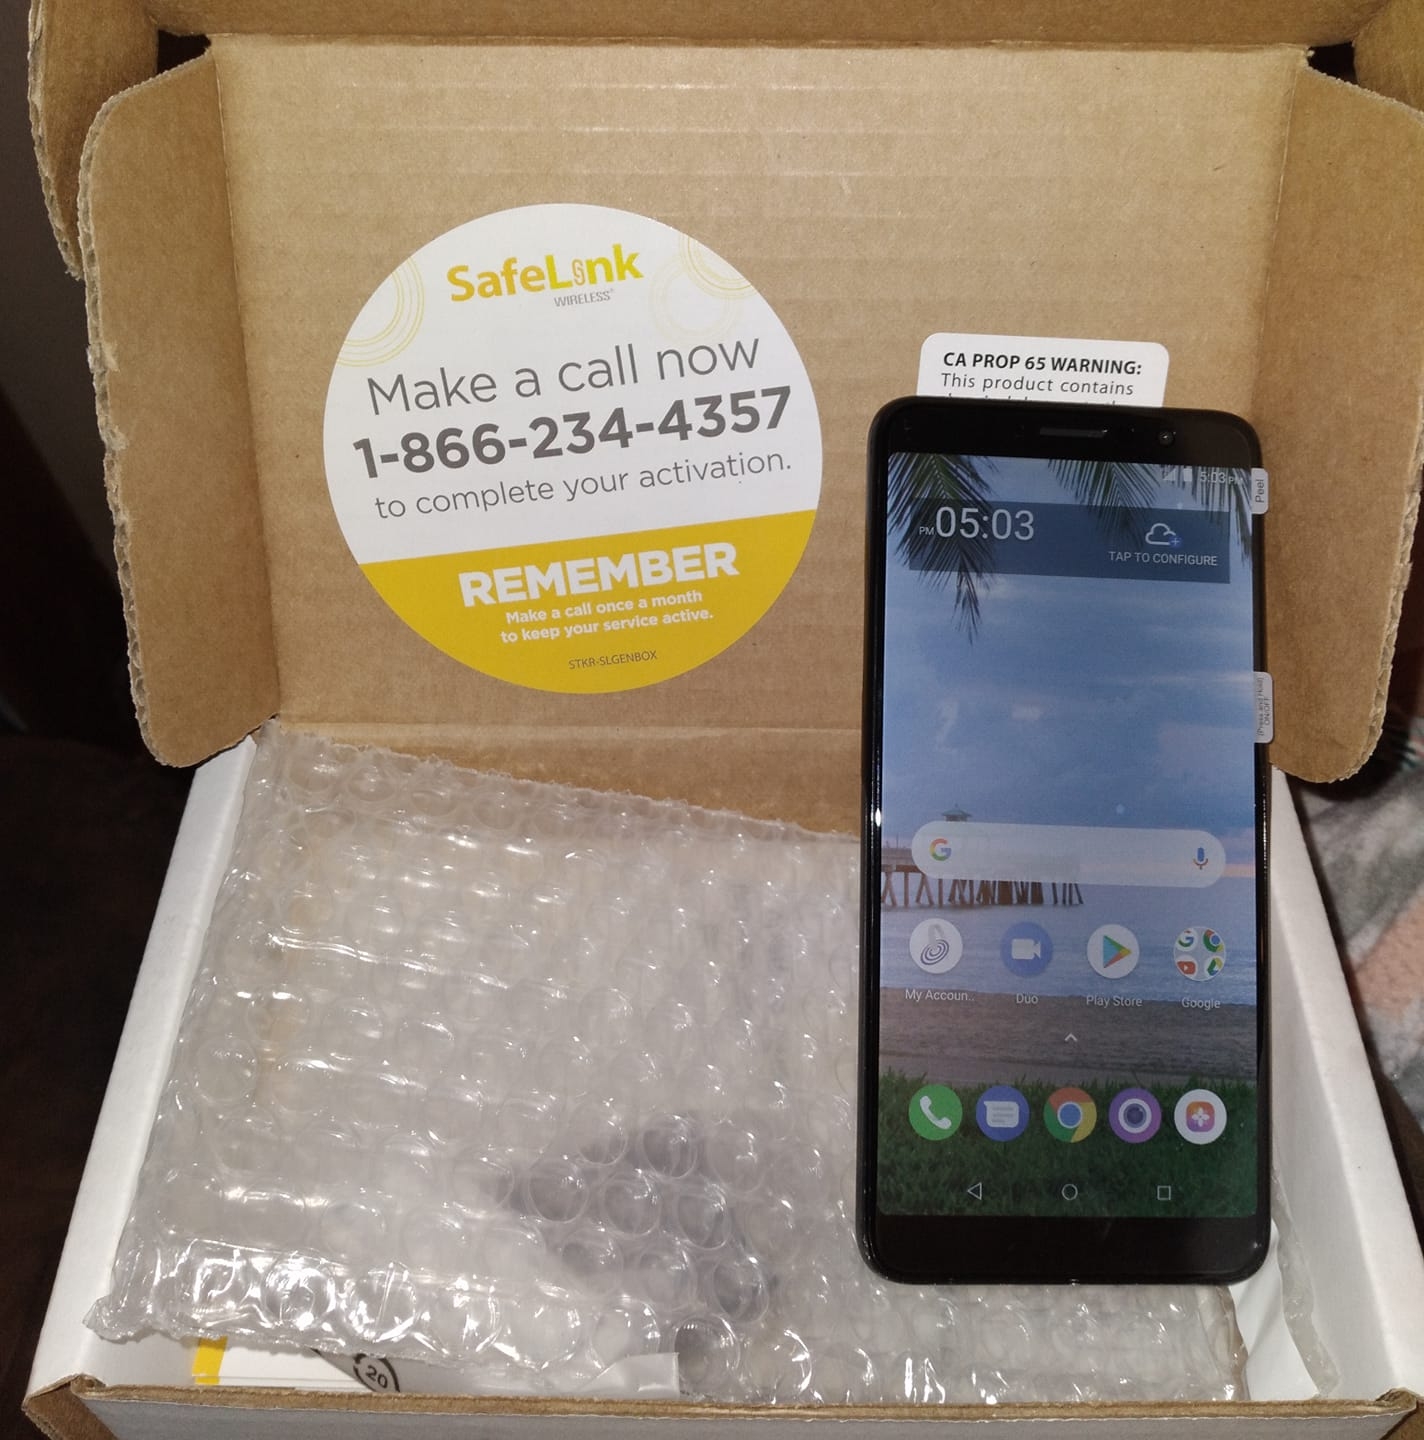 How To Get A Smartphone From Safelink